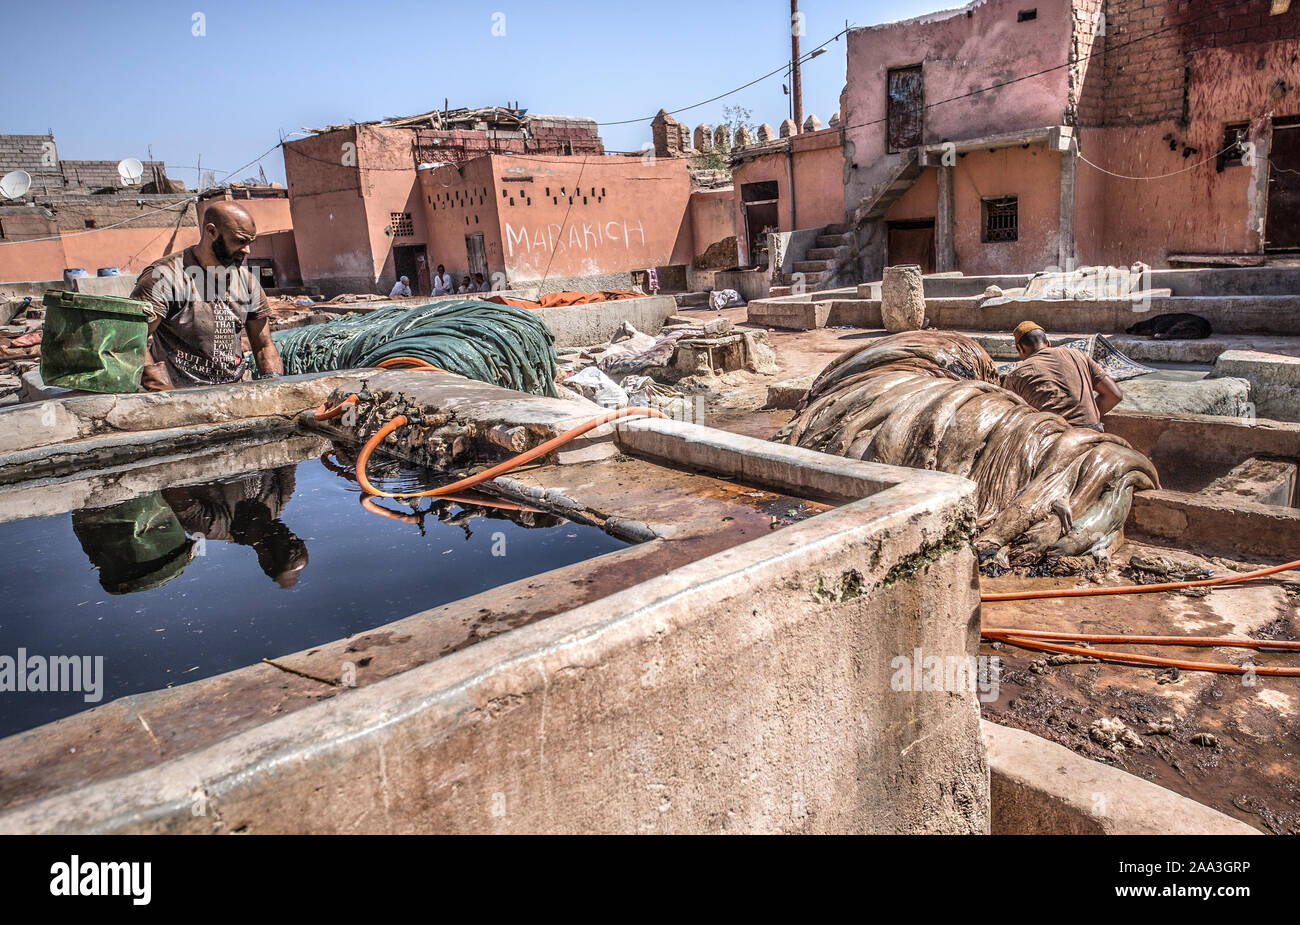 A men working in a tannery, marrakesh, Morroco Stock Photo